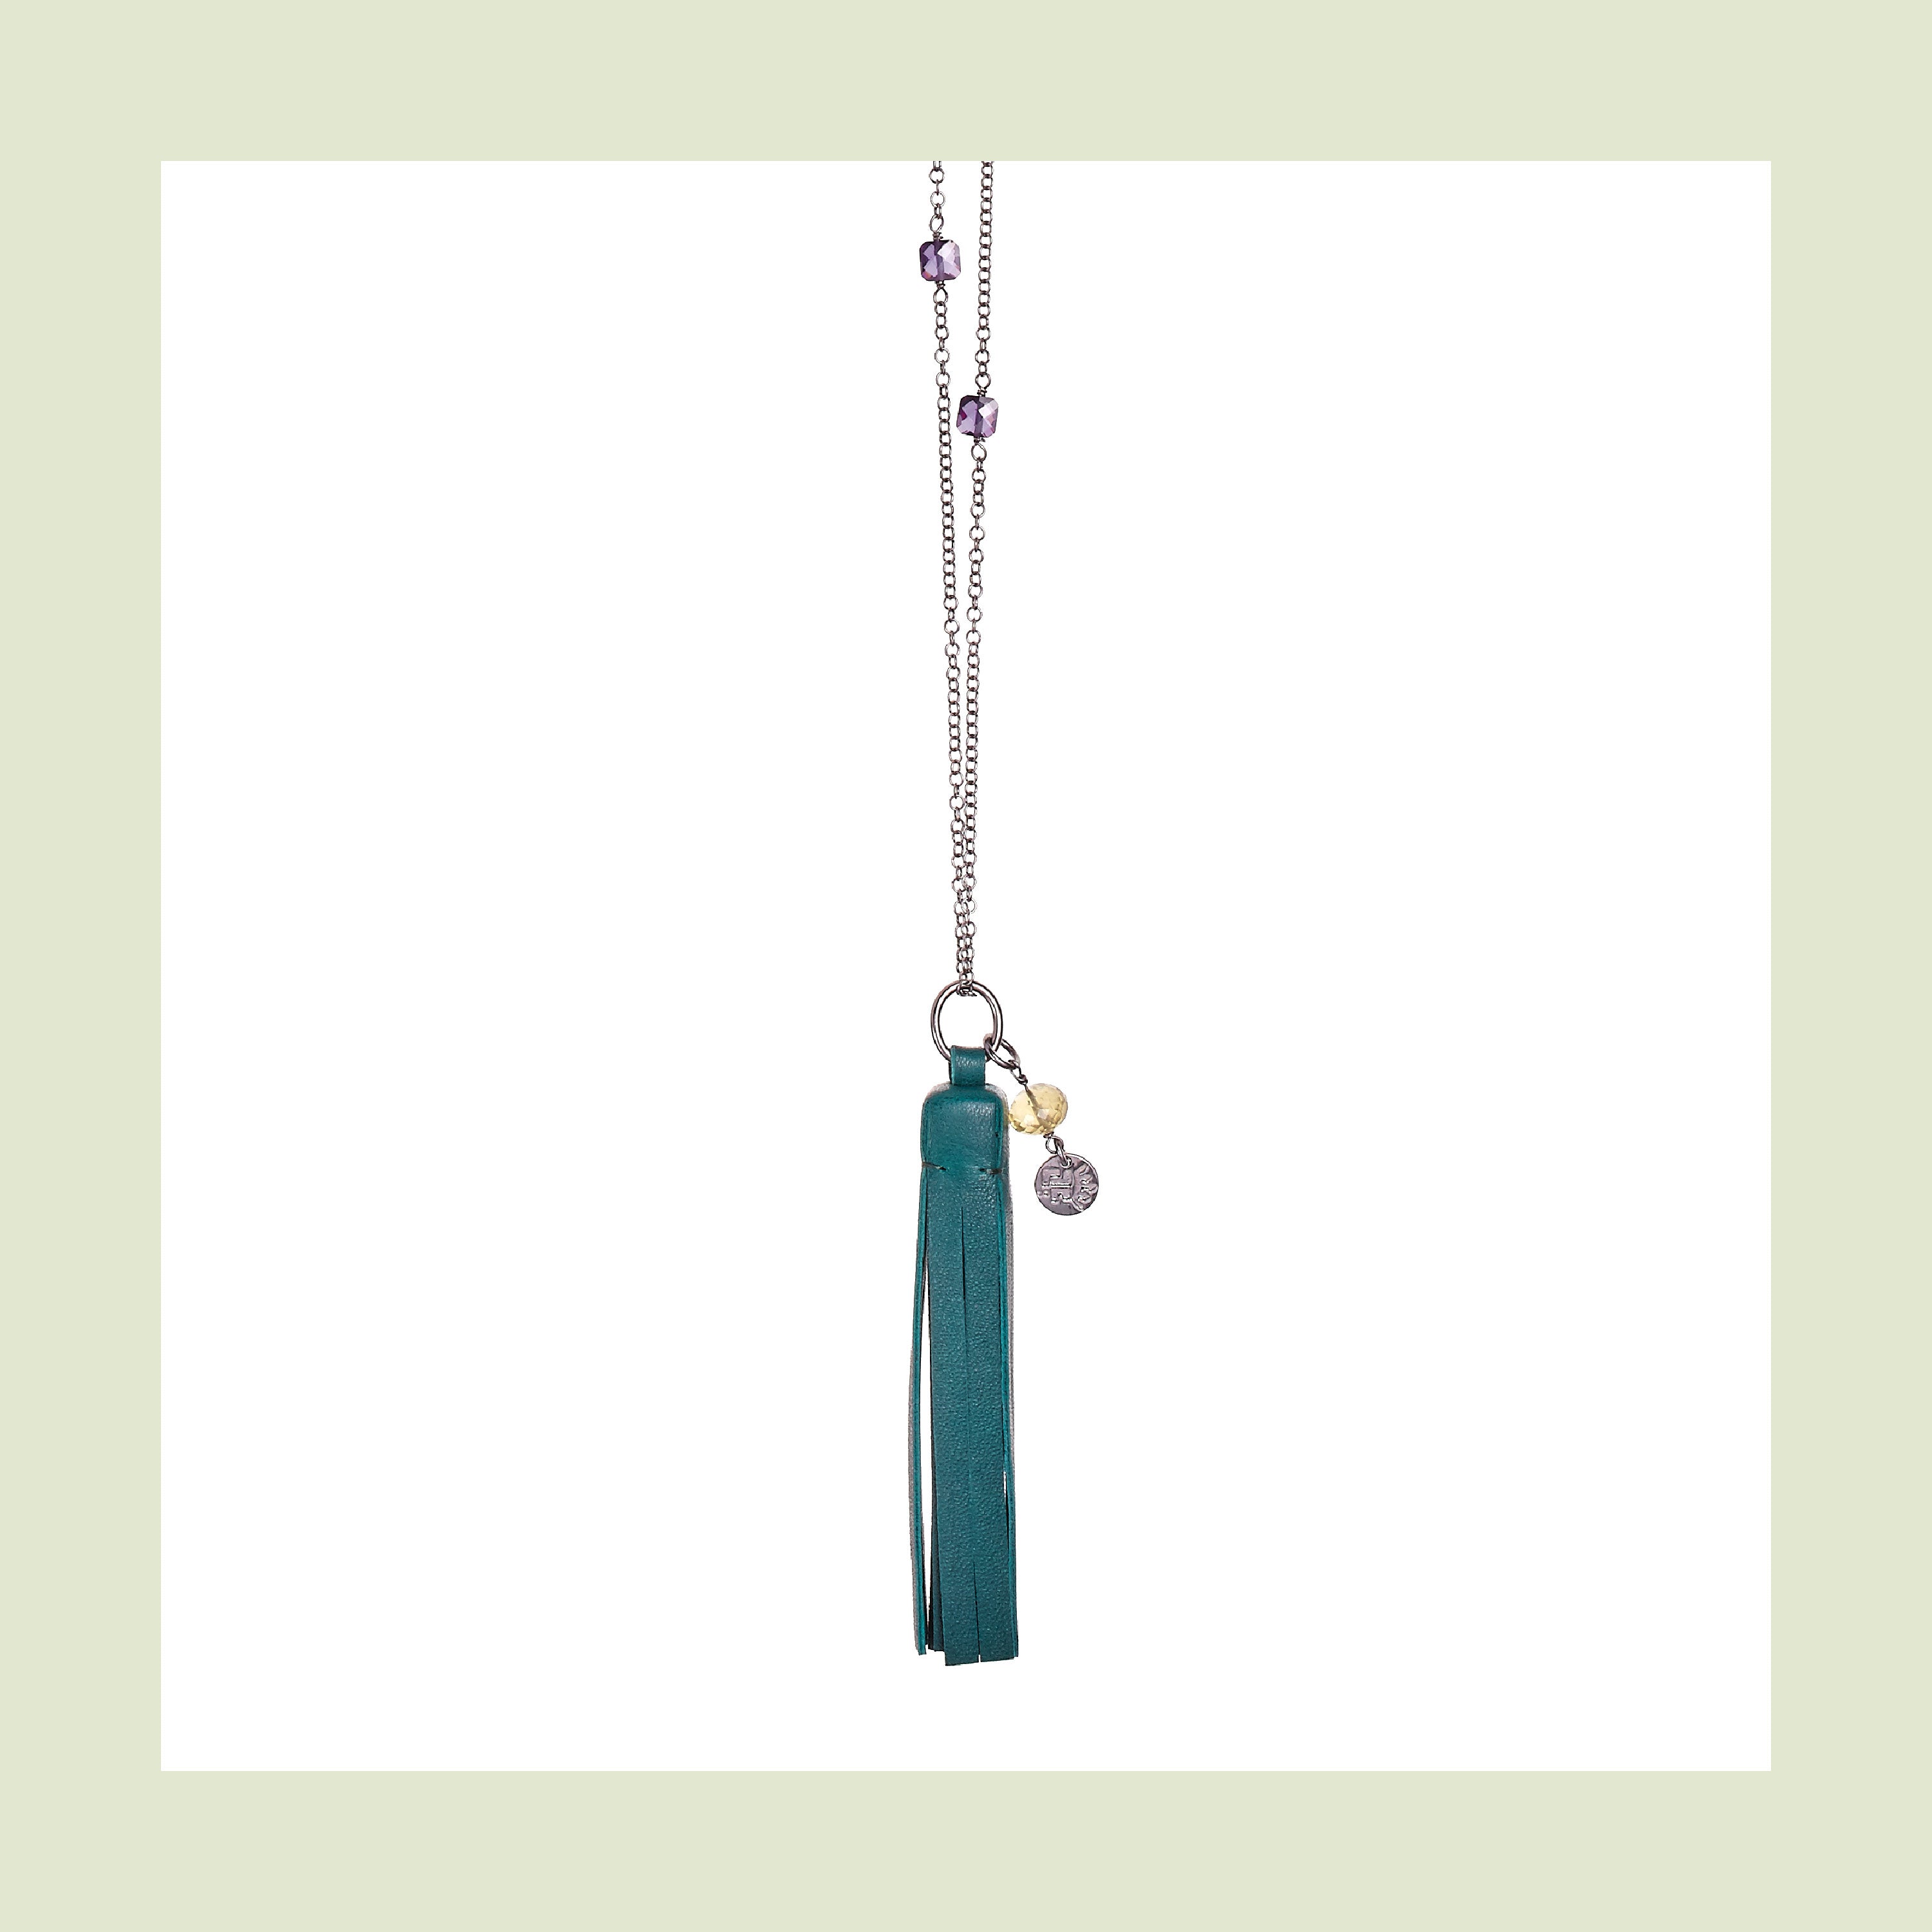 Tassel “Square” Necklace with Green Leather, Zircon and Quartz